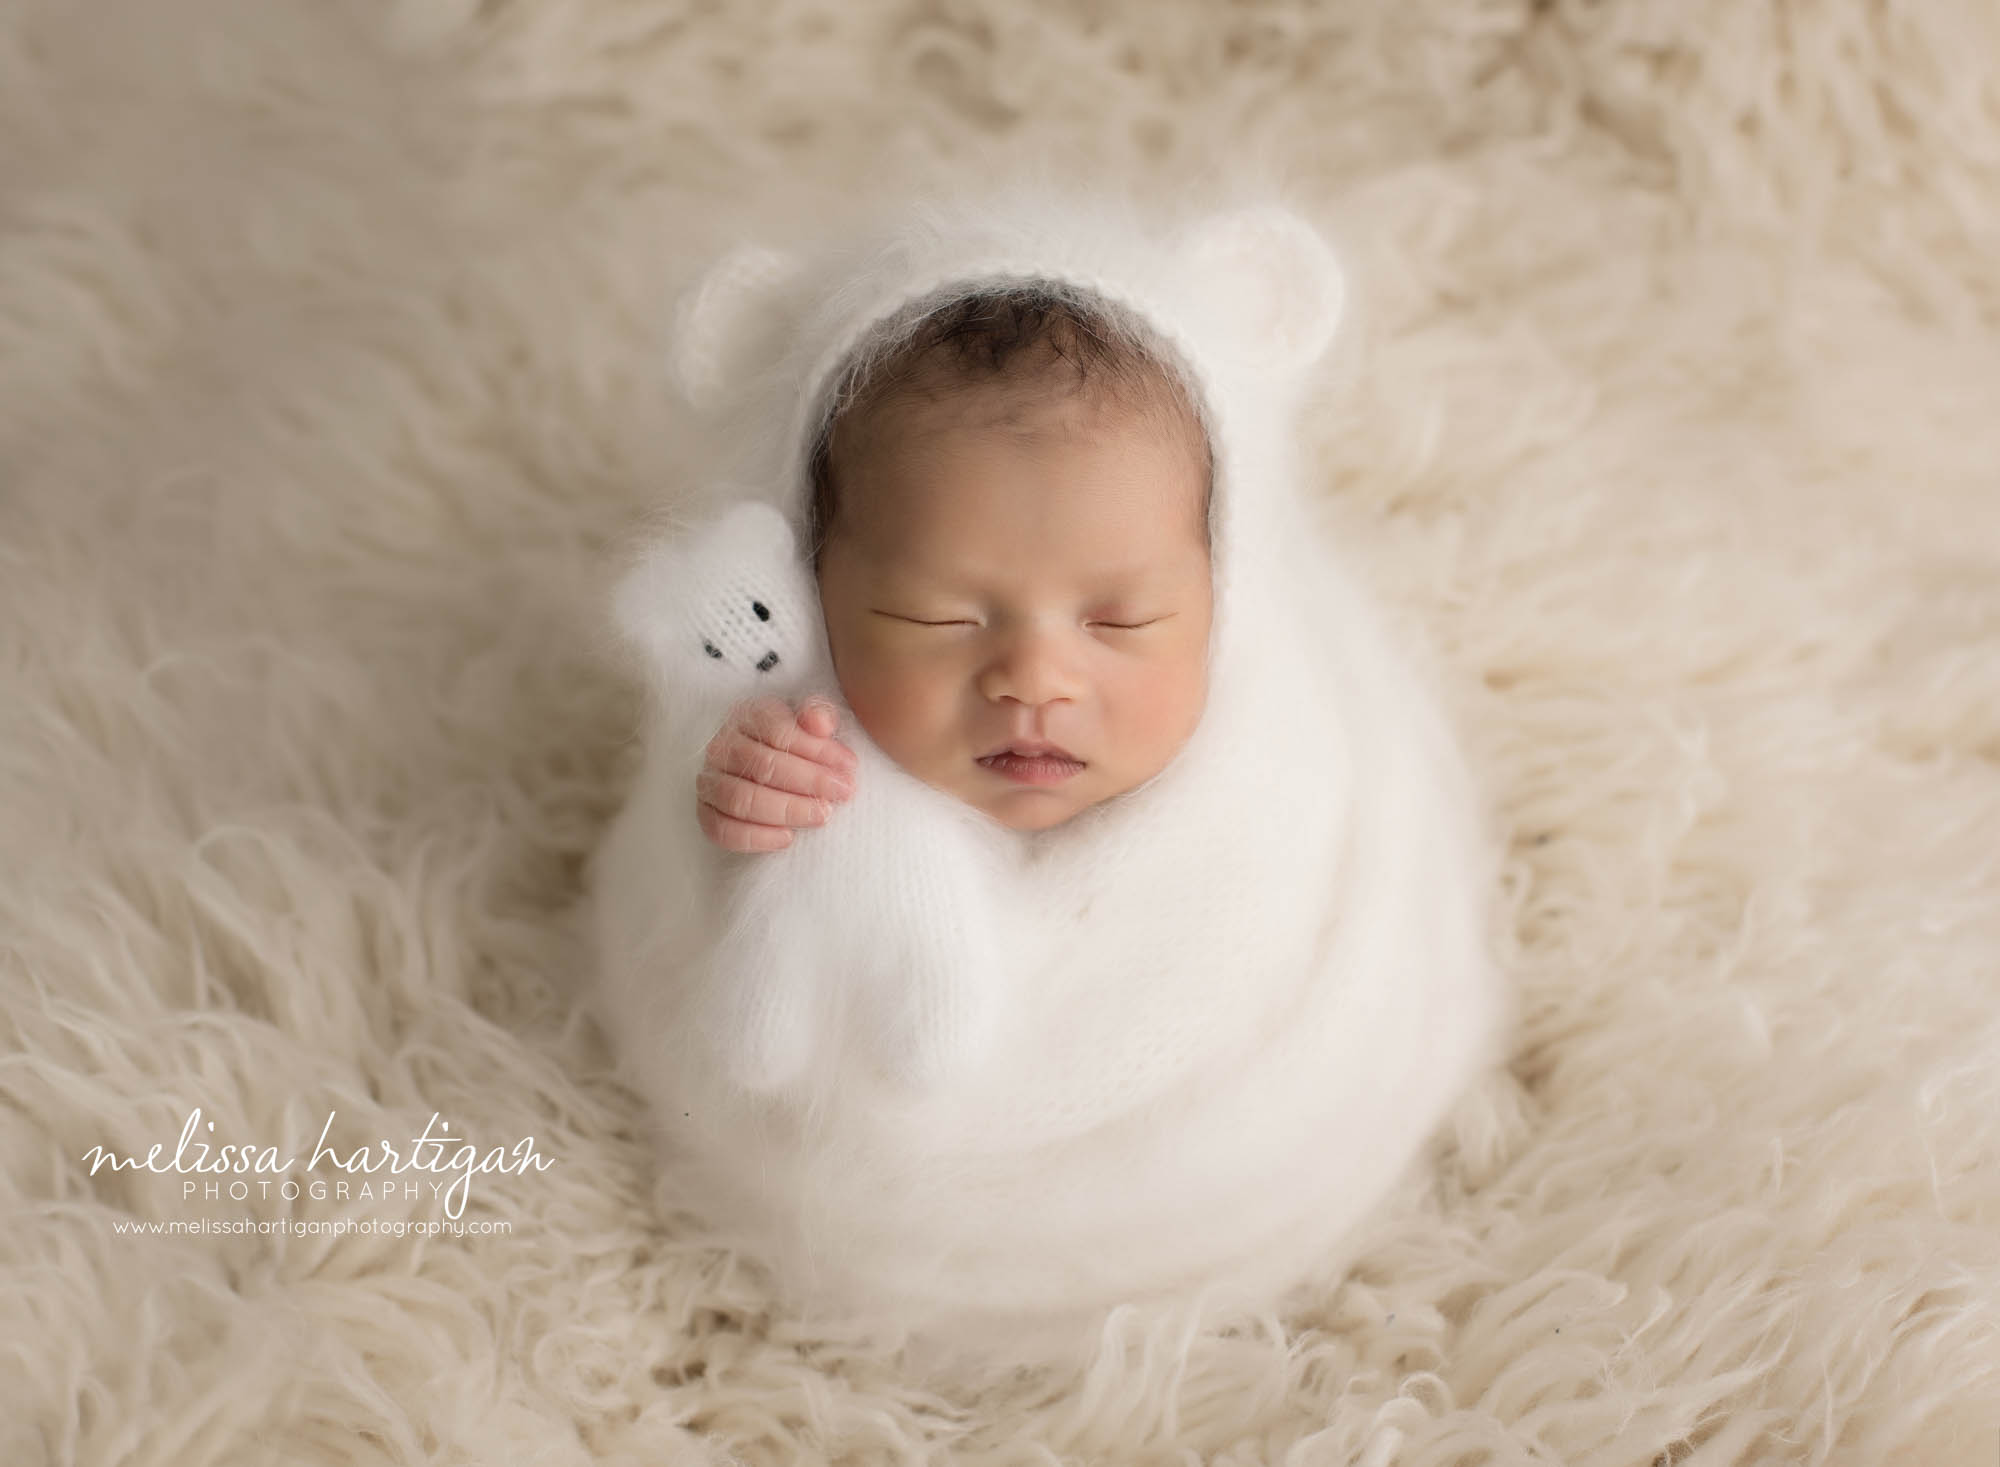 baby girl wrapped in white knitted layer wrap wearing matching bear bonnet and holdinng teddy bear lovey